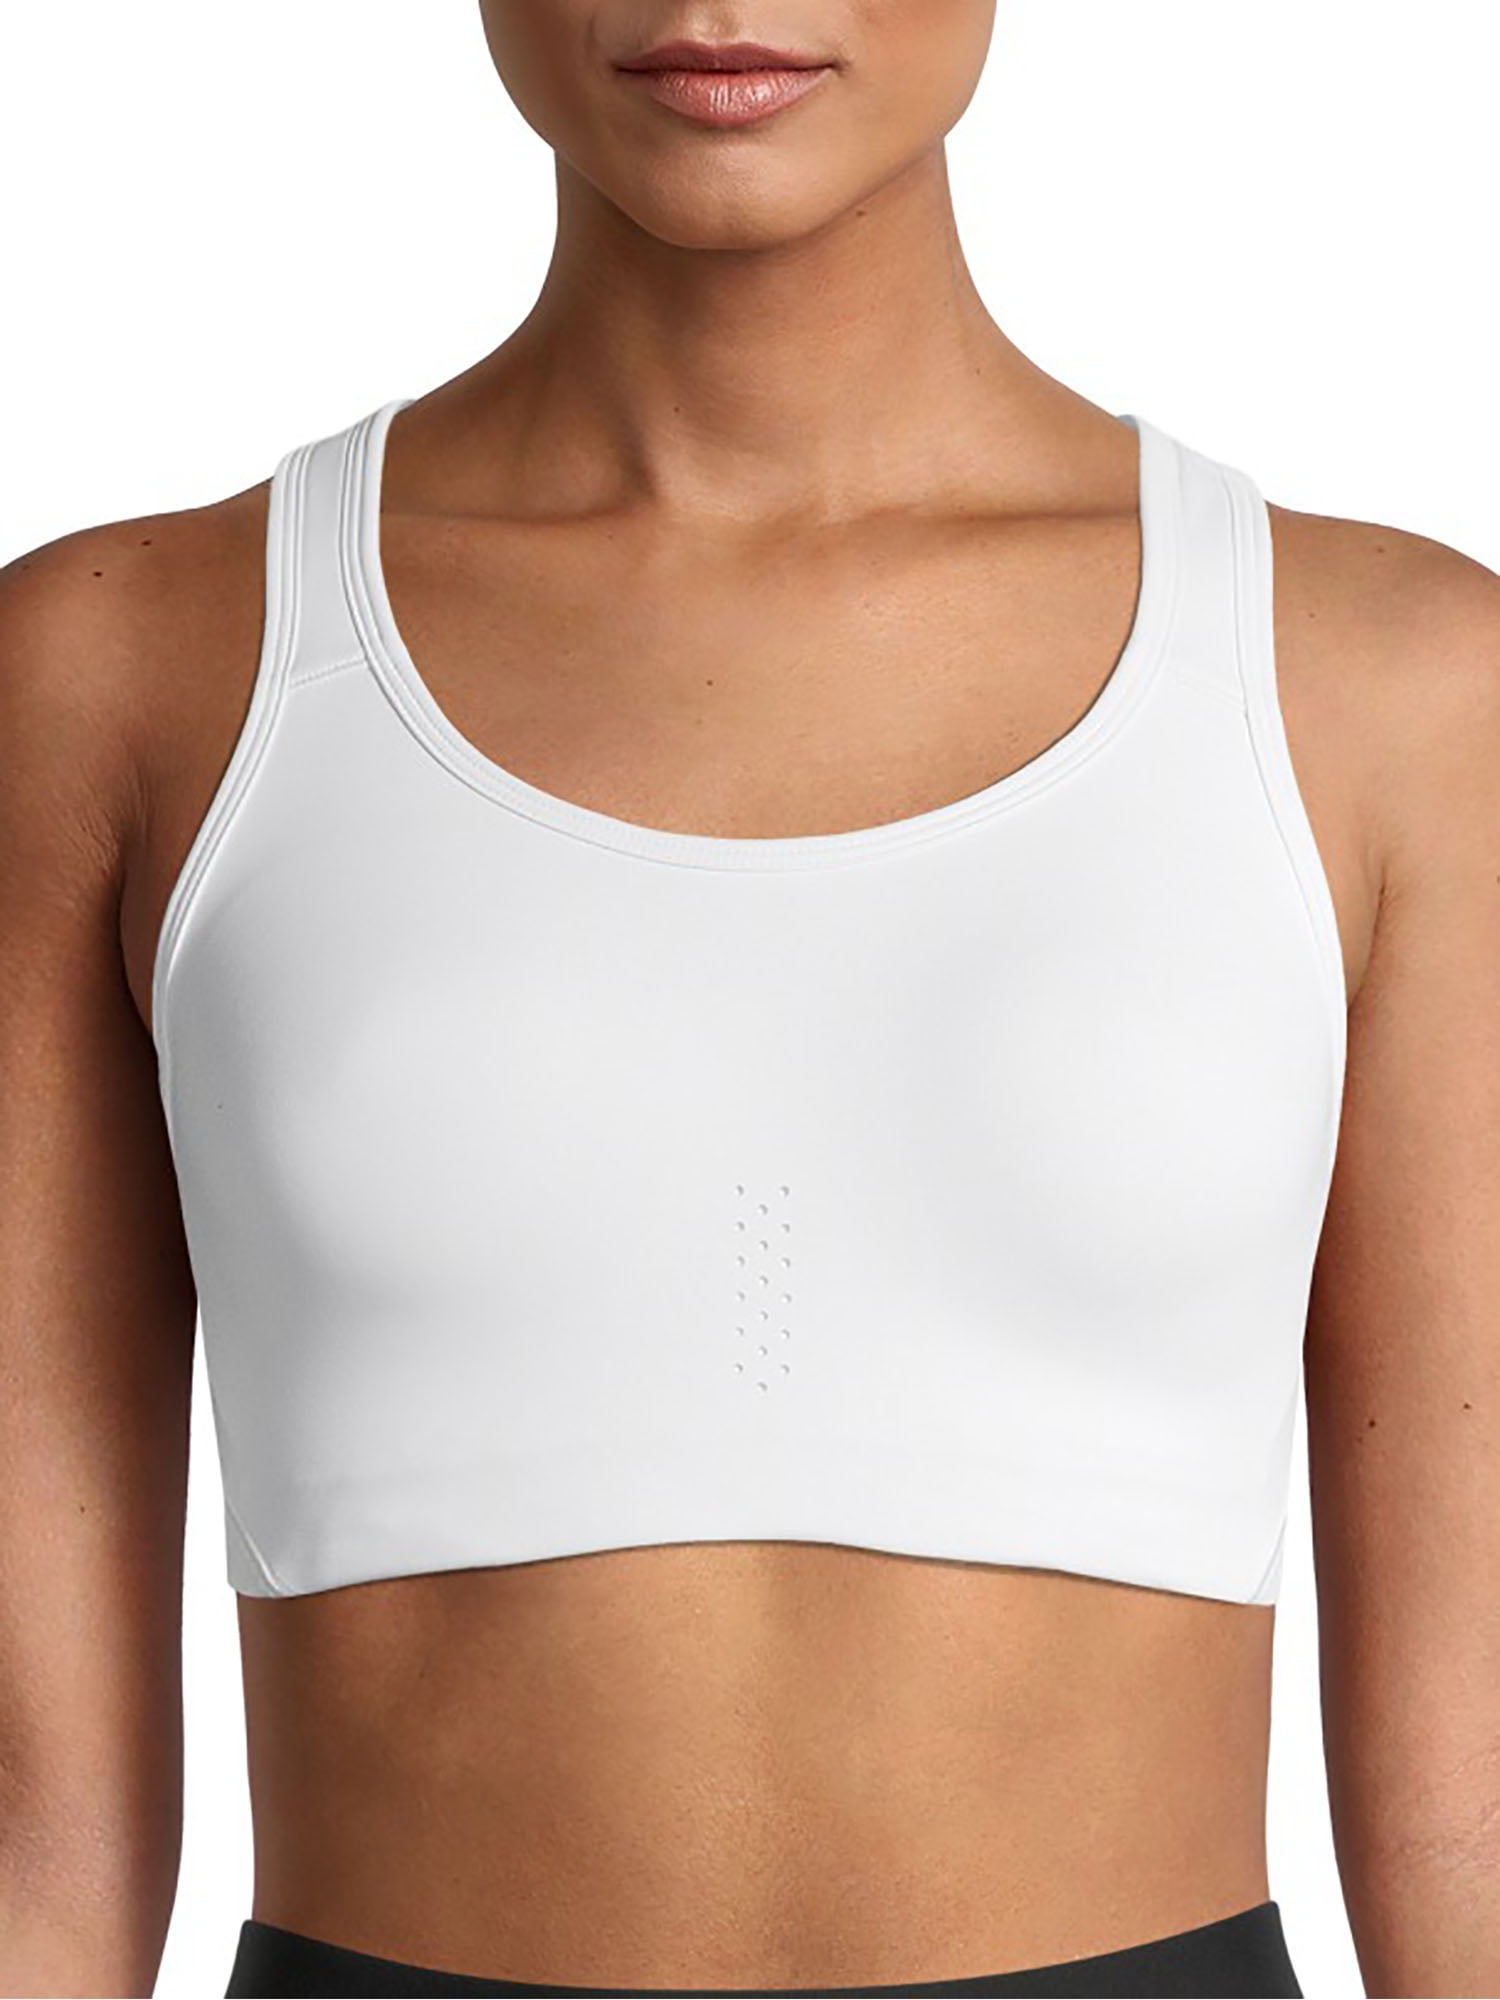 Avia Molded Cup Sports Bra #Ad #Molded, #ad, #Avia, #Cup